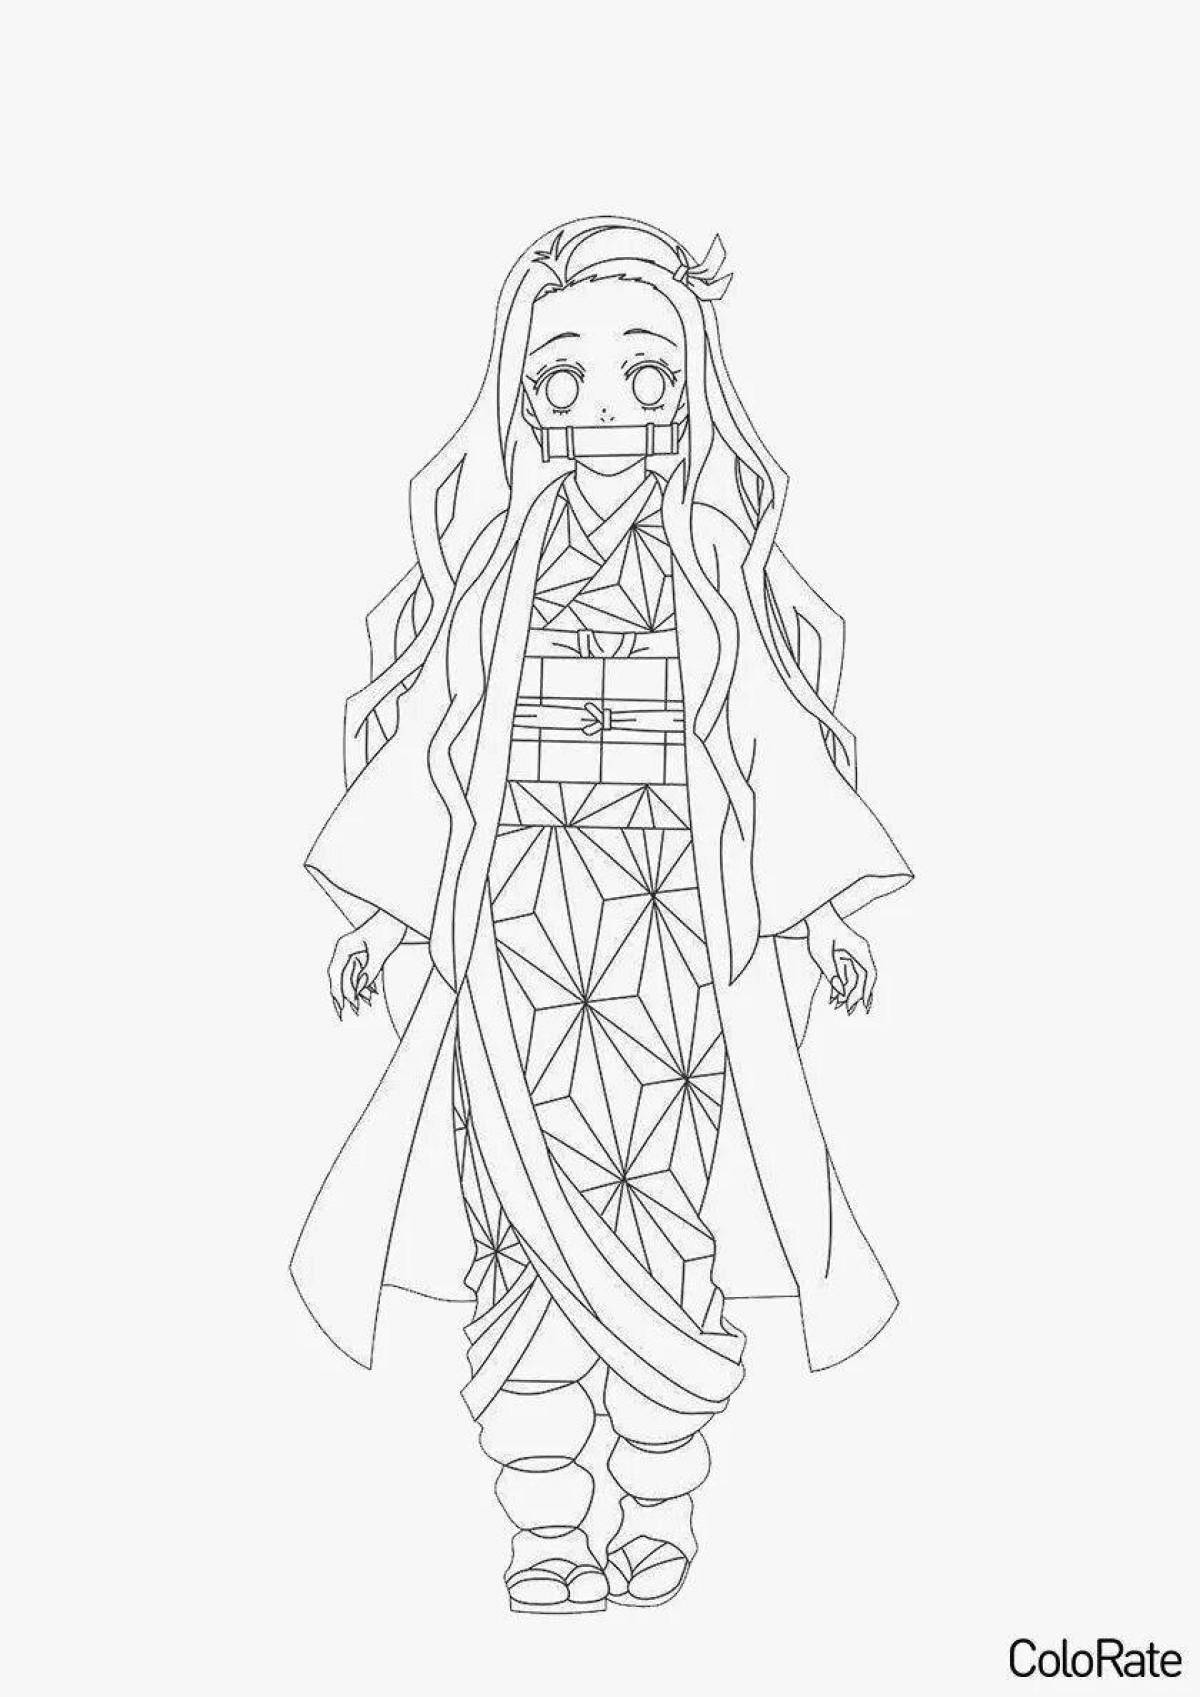 Delightful coloring pages of nezuko and zenitsu